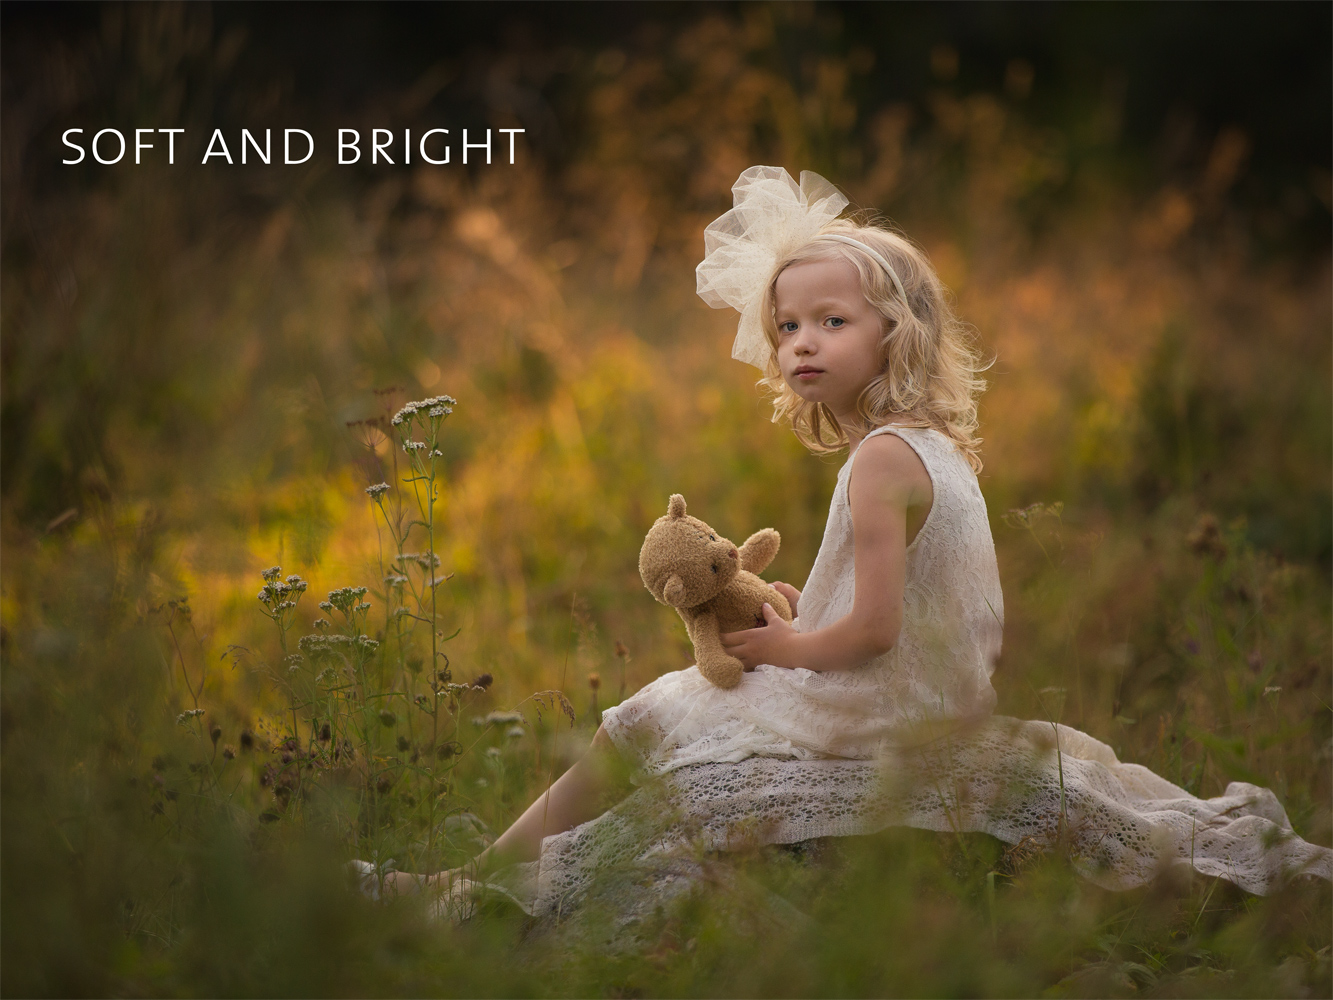 pia-rautio-Soft_and_Bright_web How to Add an Artistic Look to Your Images Combining Lightroom and Photoshop Blueprints Lightroom Presets Lightroom Tips Photoshop Actions Photoshop Tips  